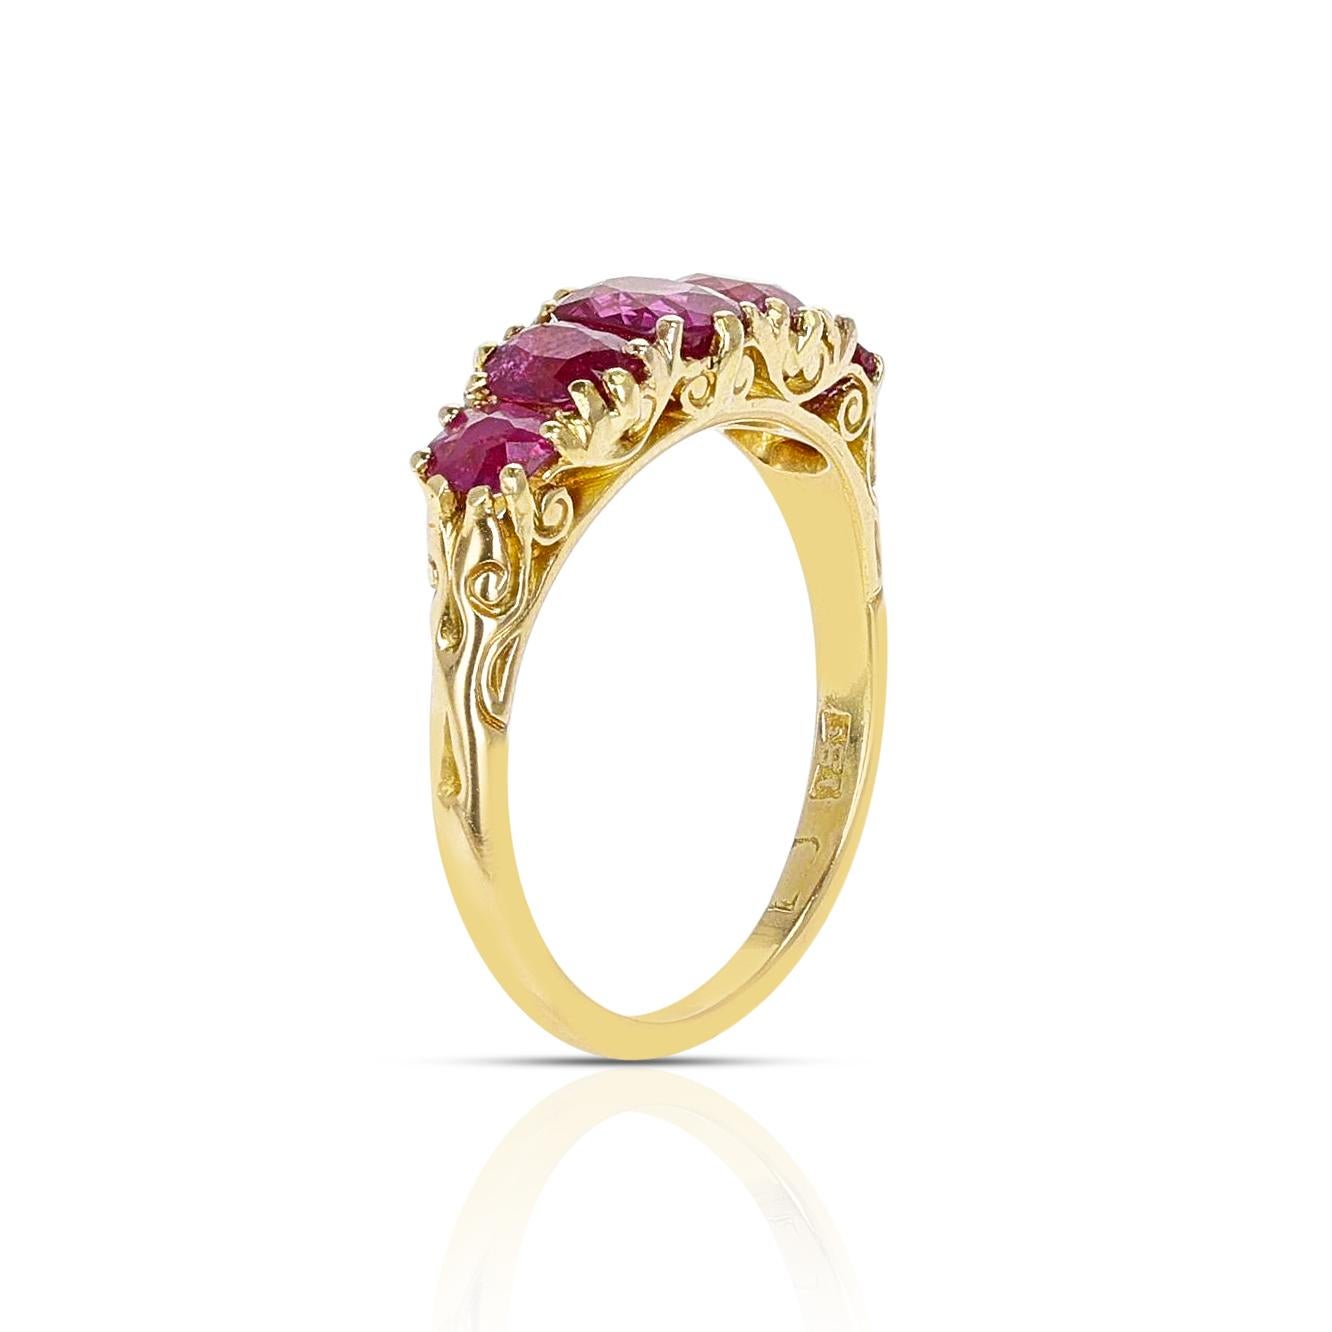 A beautiful Five Stone Ruby Oval and Round Victorian Ring made in 18 Karat Yellow Gold. The Ring Size is 8.25 US. 